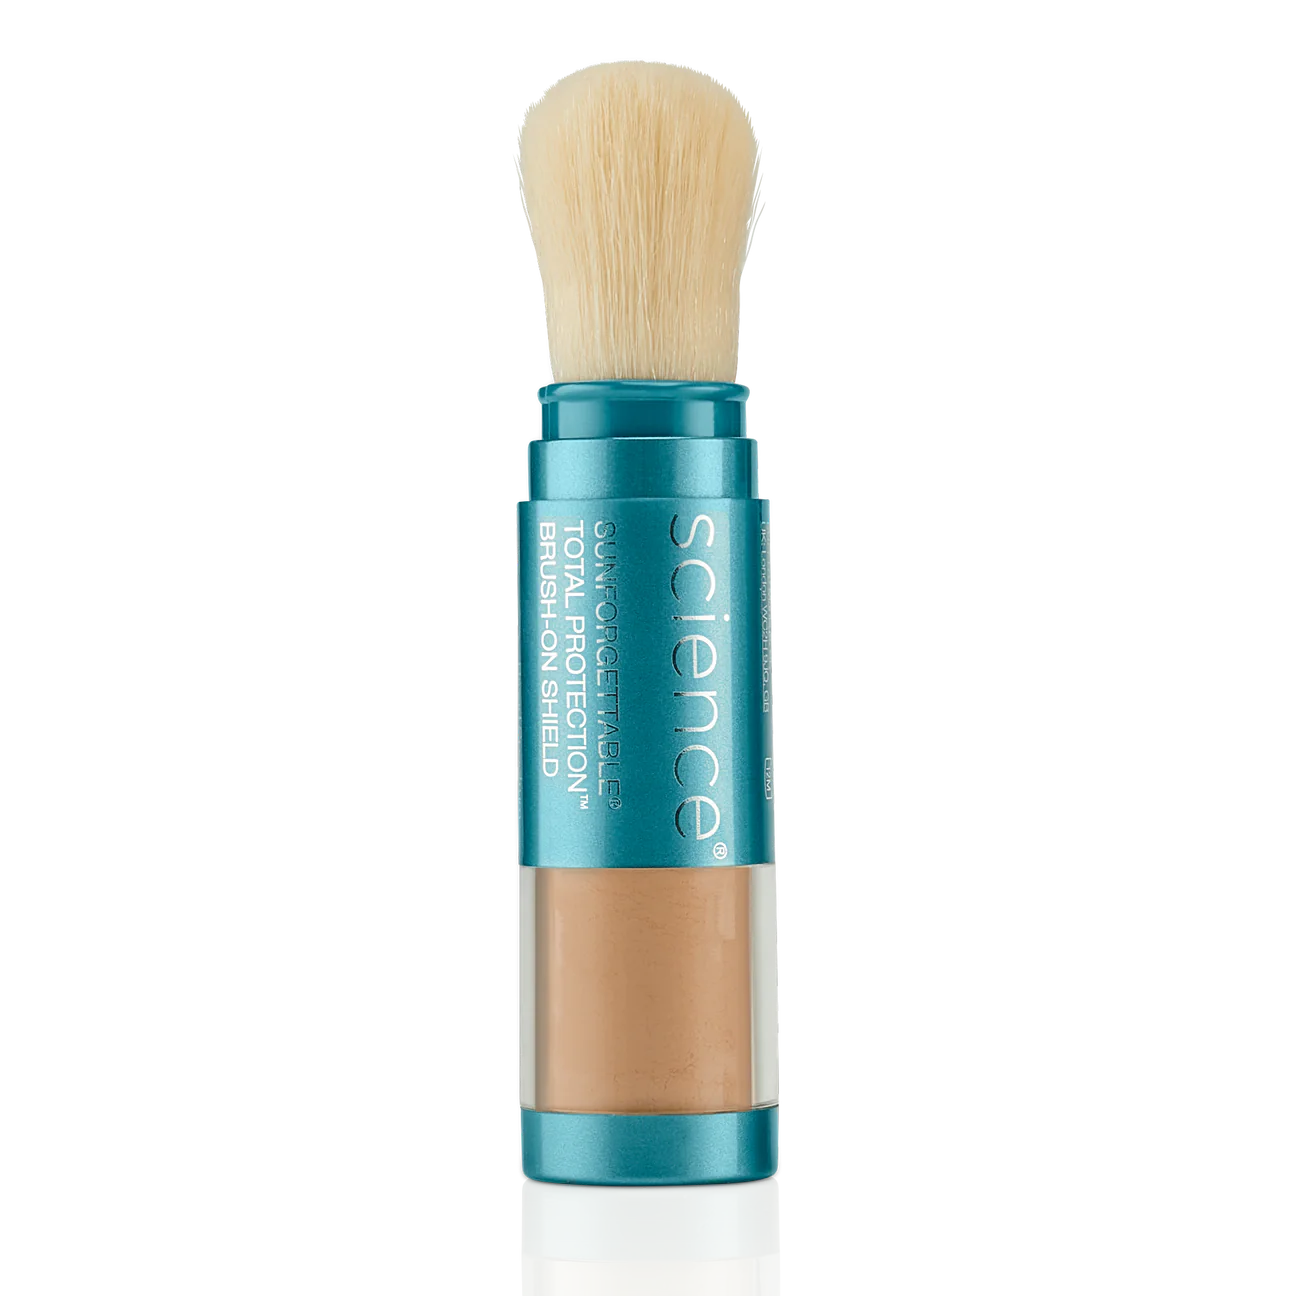 Colorescience Sunforgettable Total Protection Brush-On Shield SPF 50 in Tan